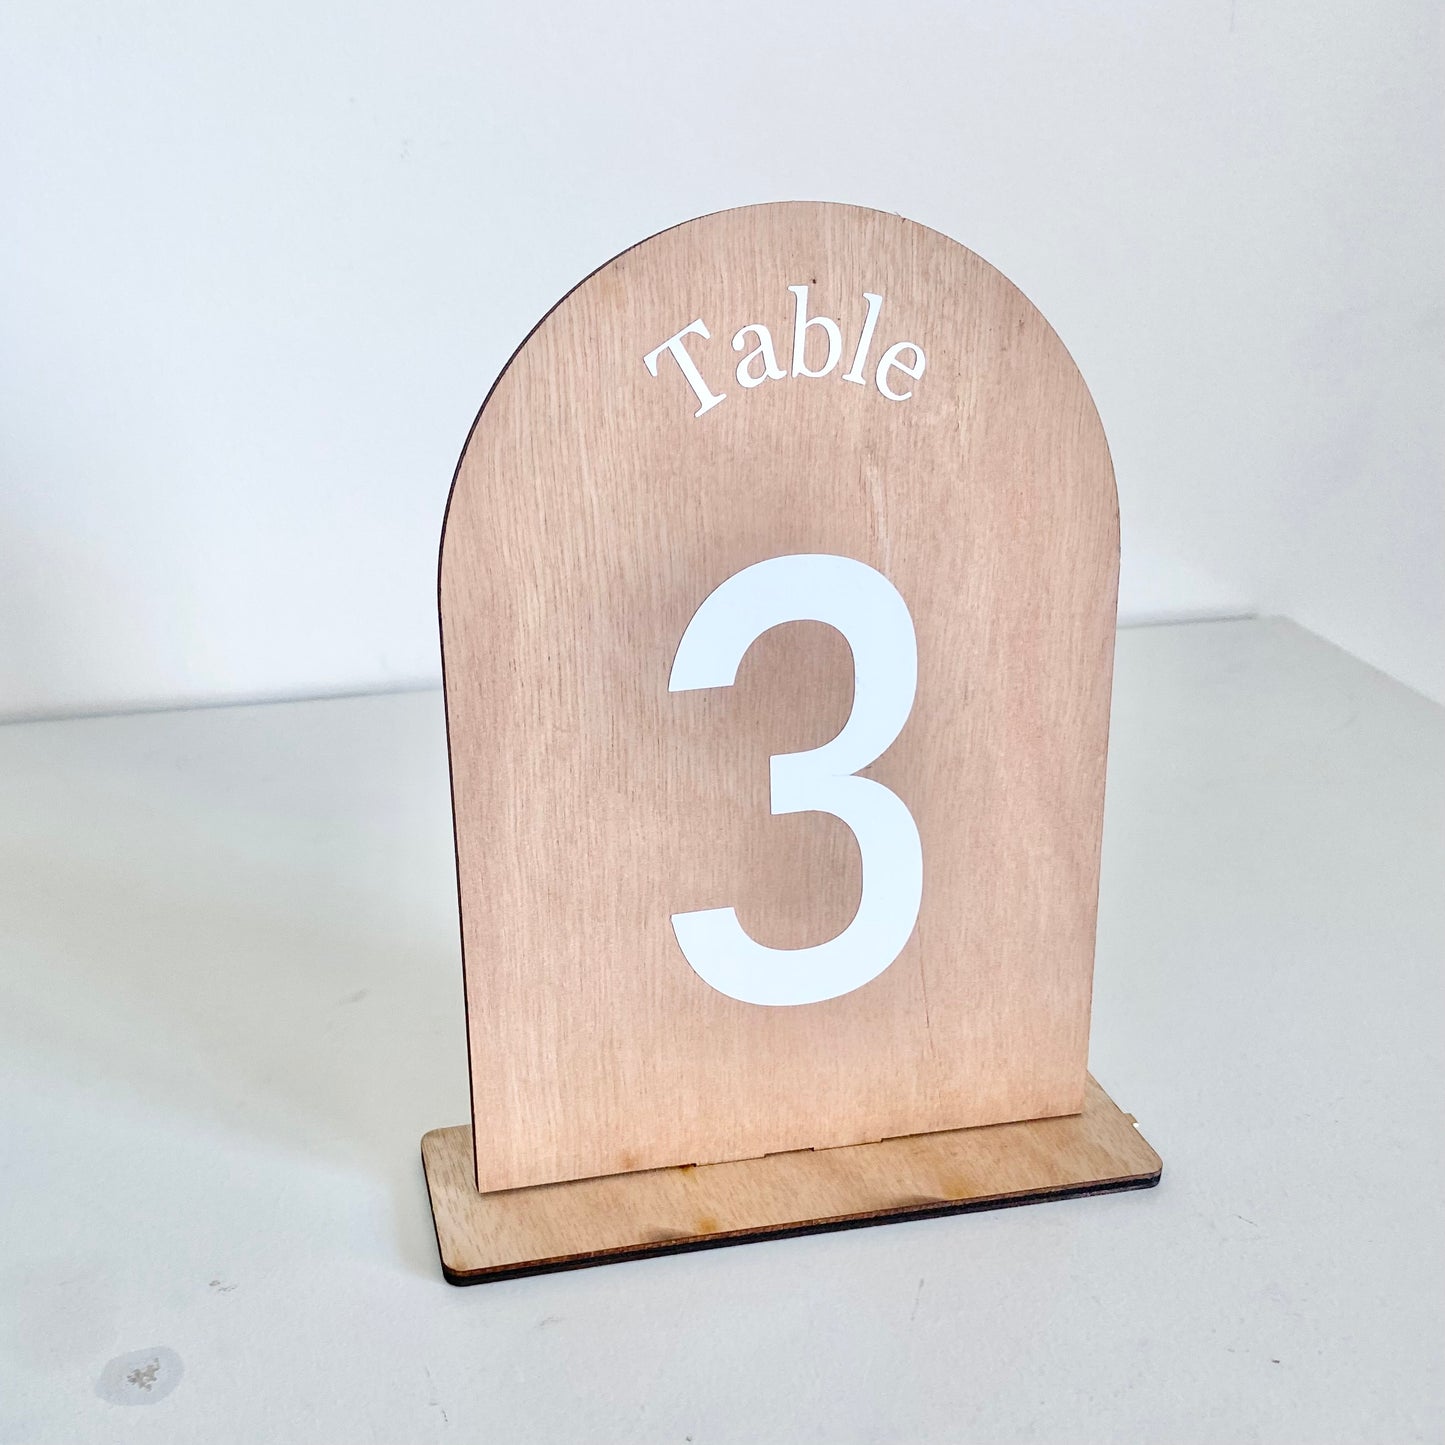 The Dave table number